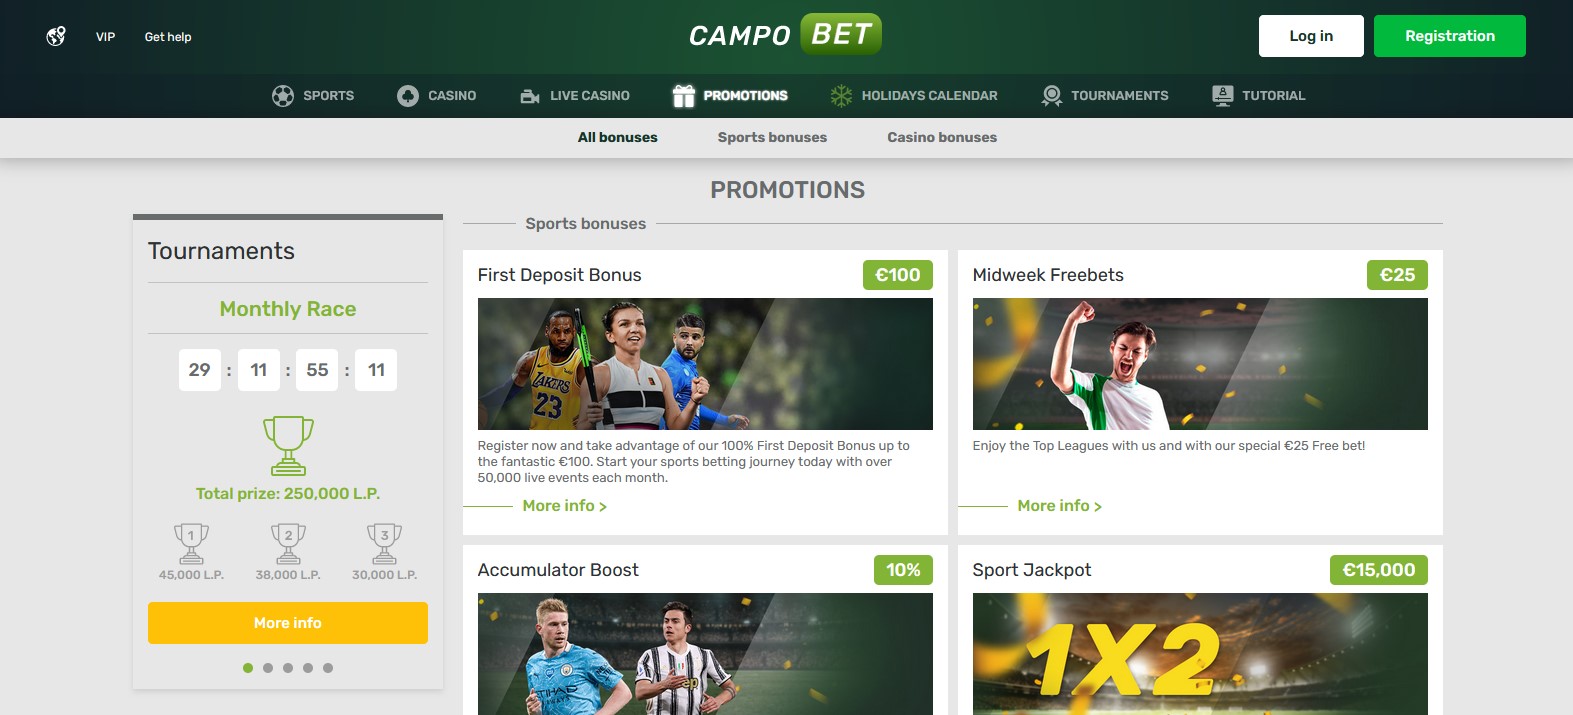 Campobet promotions